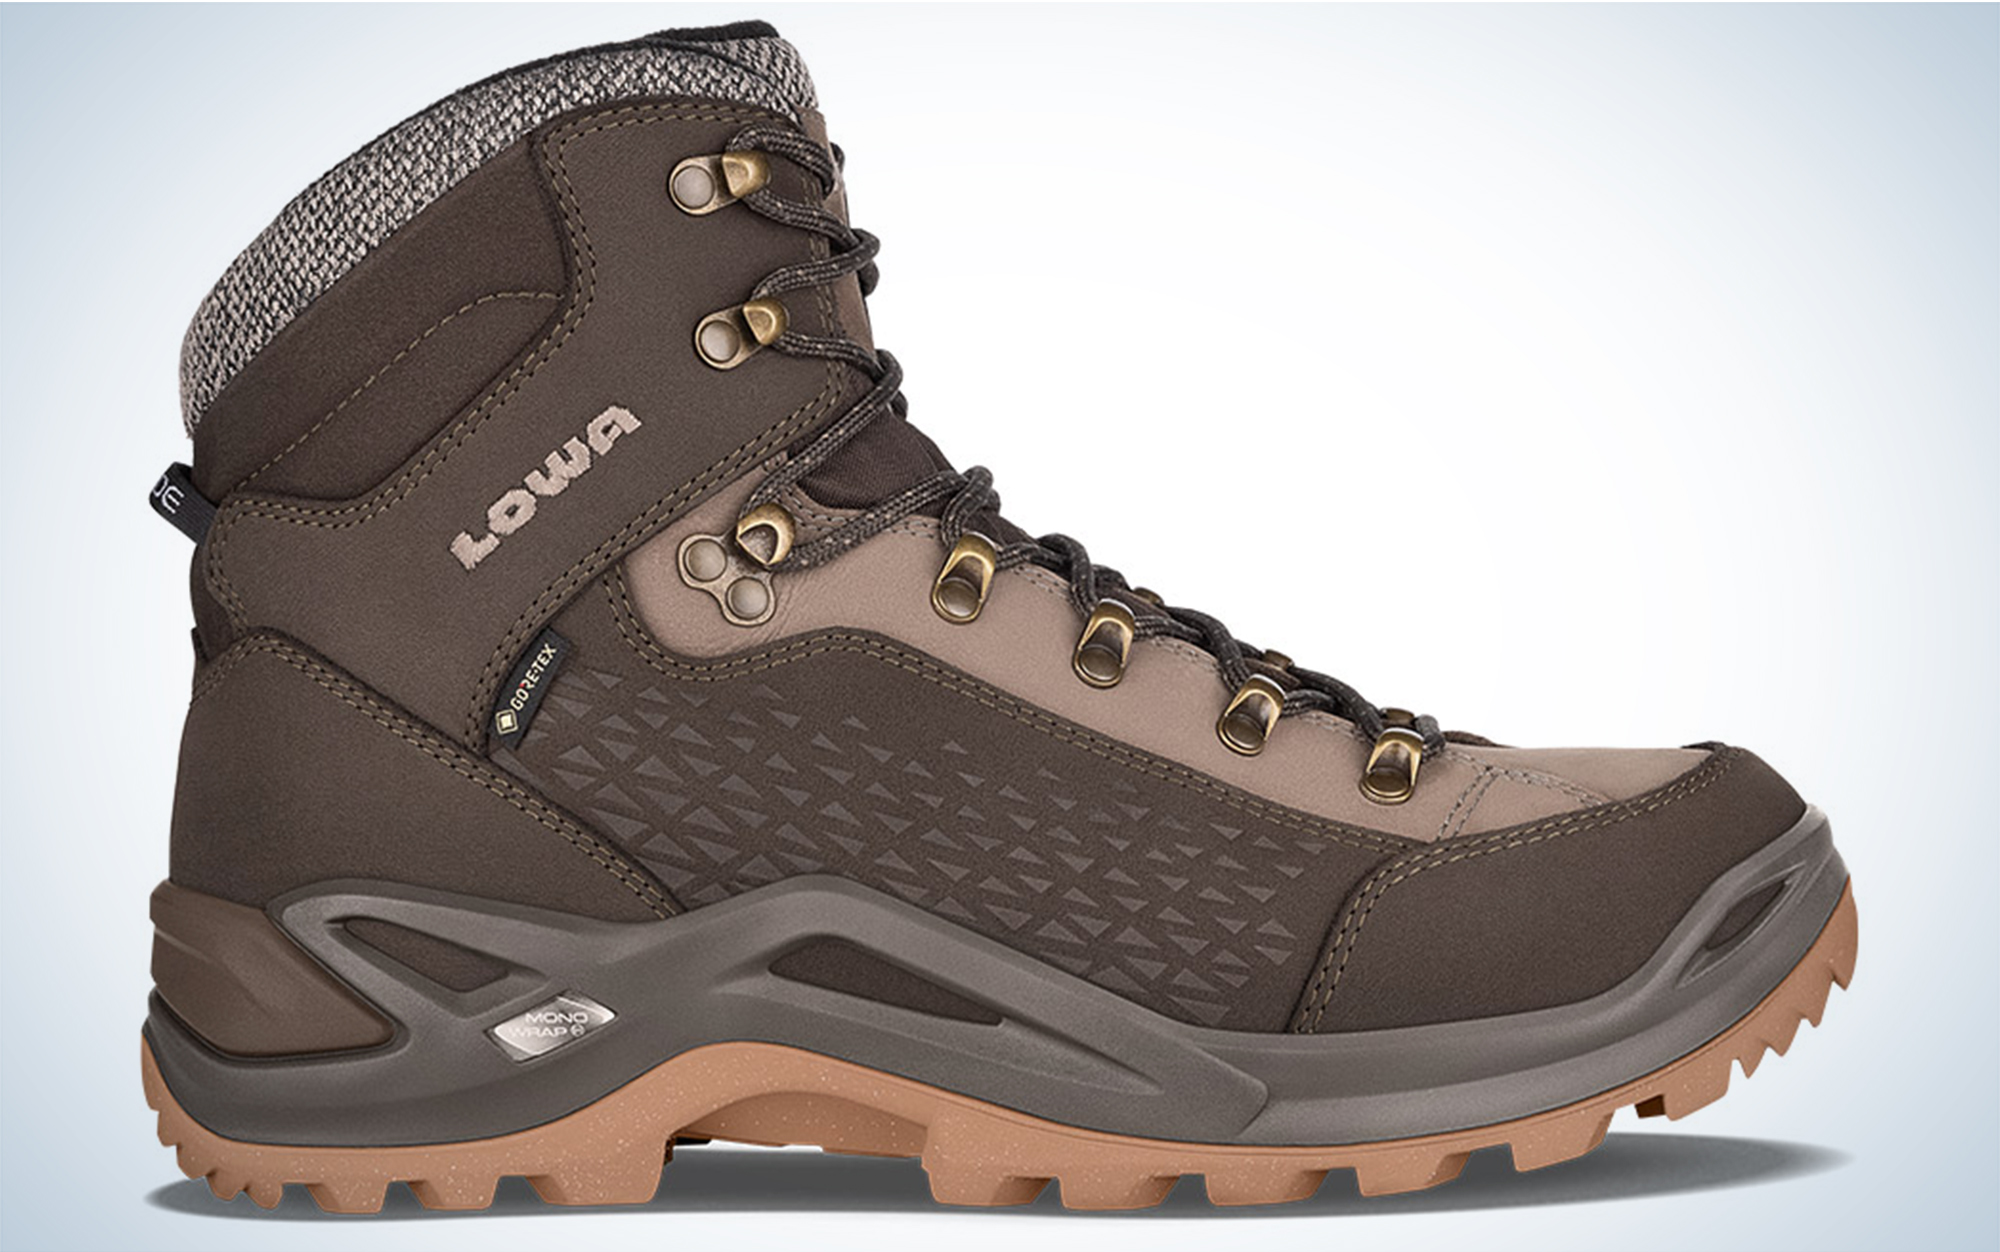 The Lowa Renegade Warm GTX Mid is the best hiking boot for men in winter.